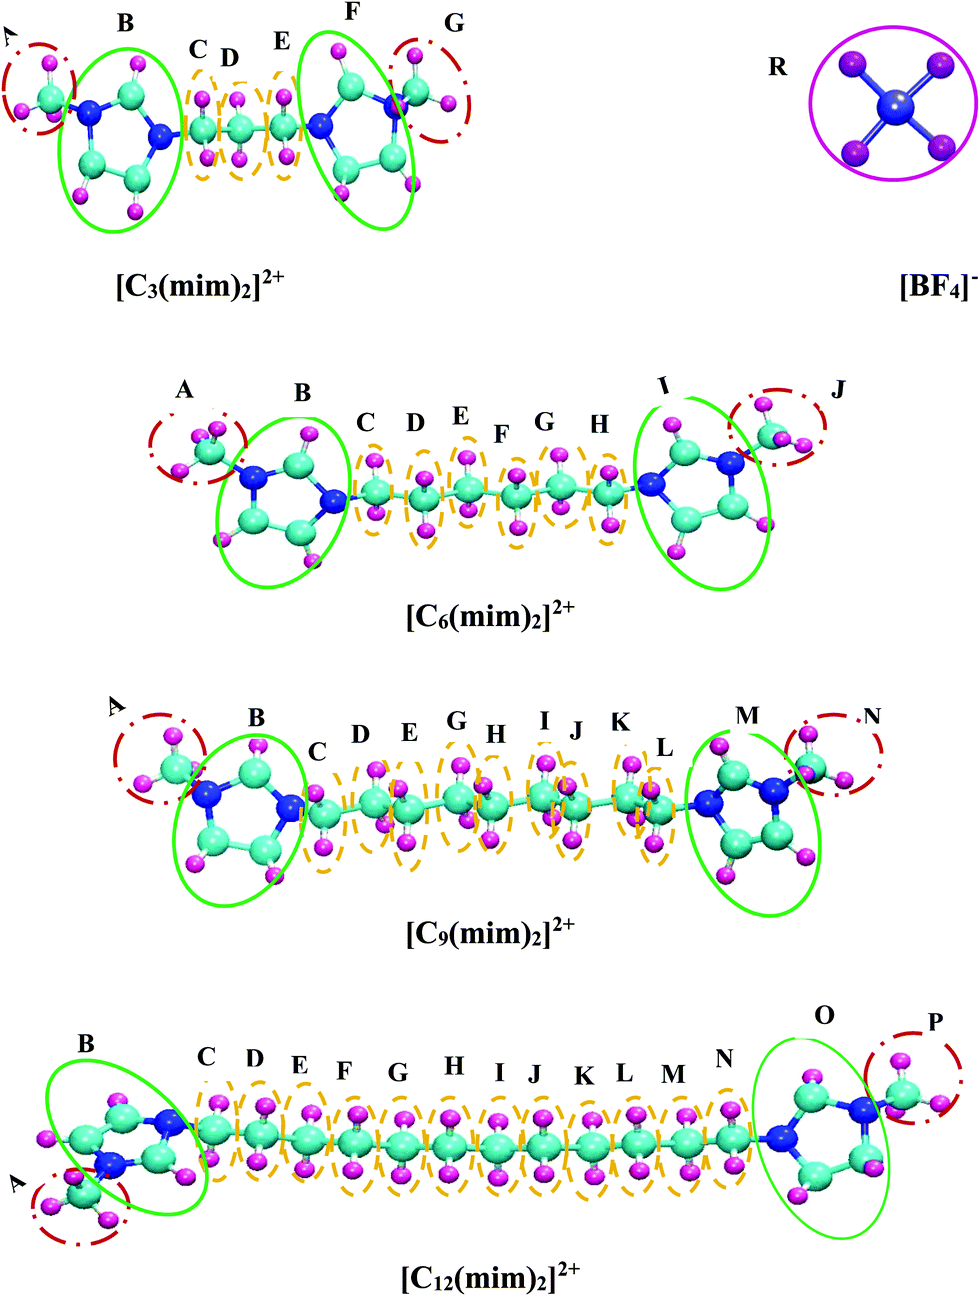 Extension of transferable coarse-grained models to dicationic ionic liquids  - Physical Chemistry Chemical Physics (RSC Publishing)  DOI:10.1039/D0CP03709E